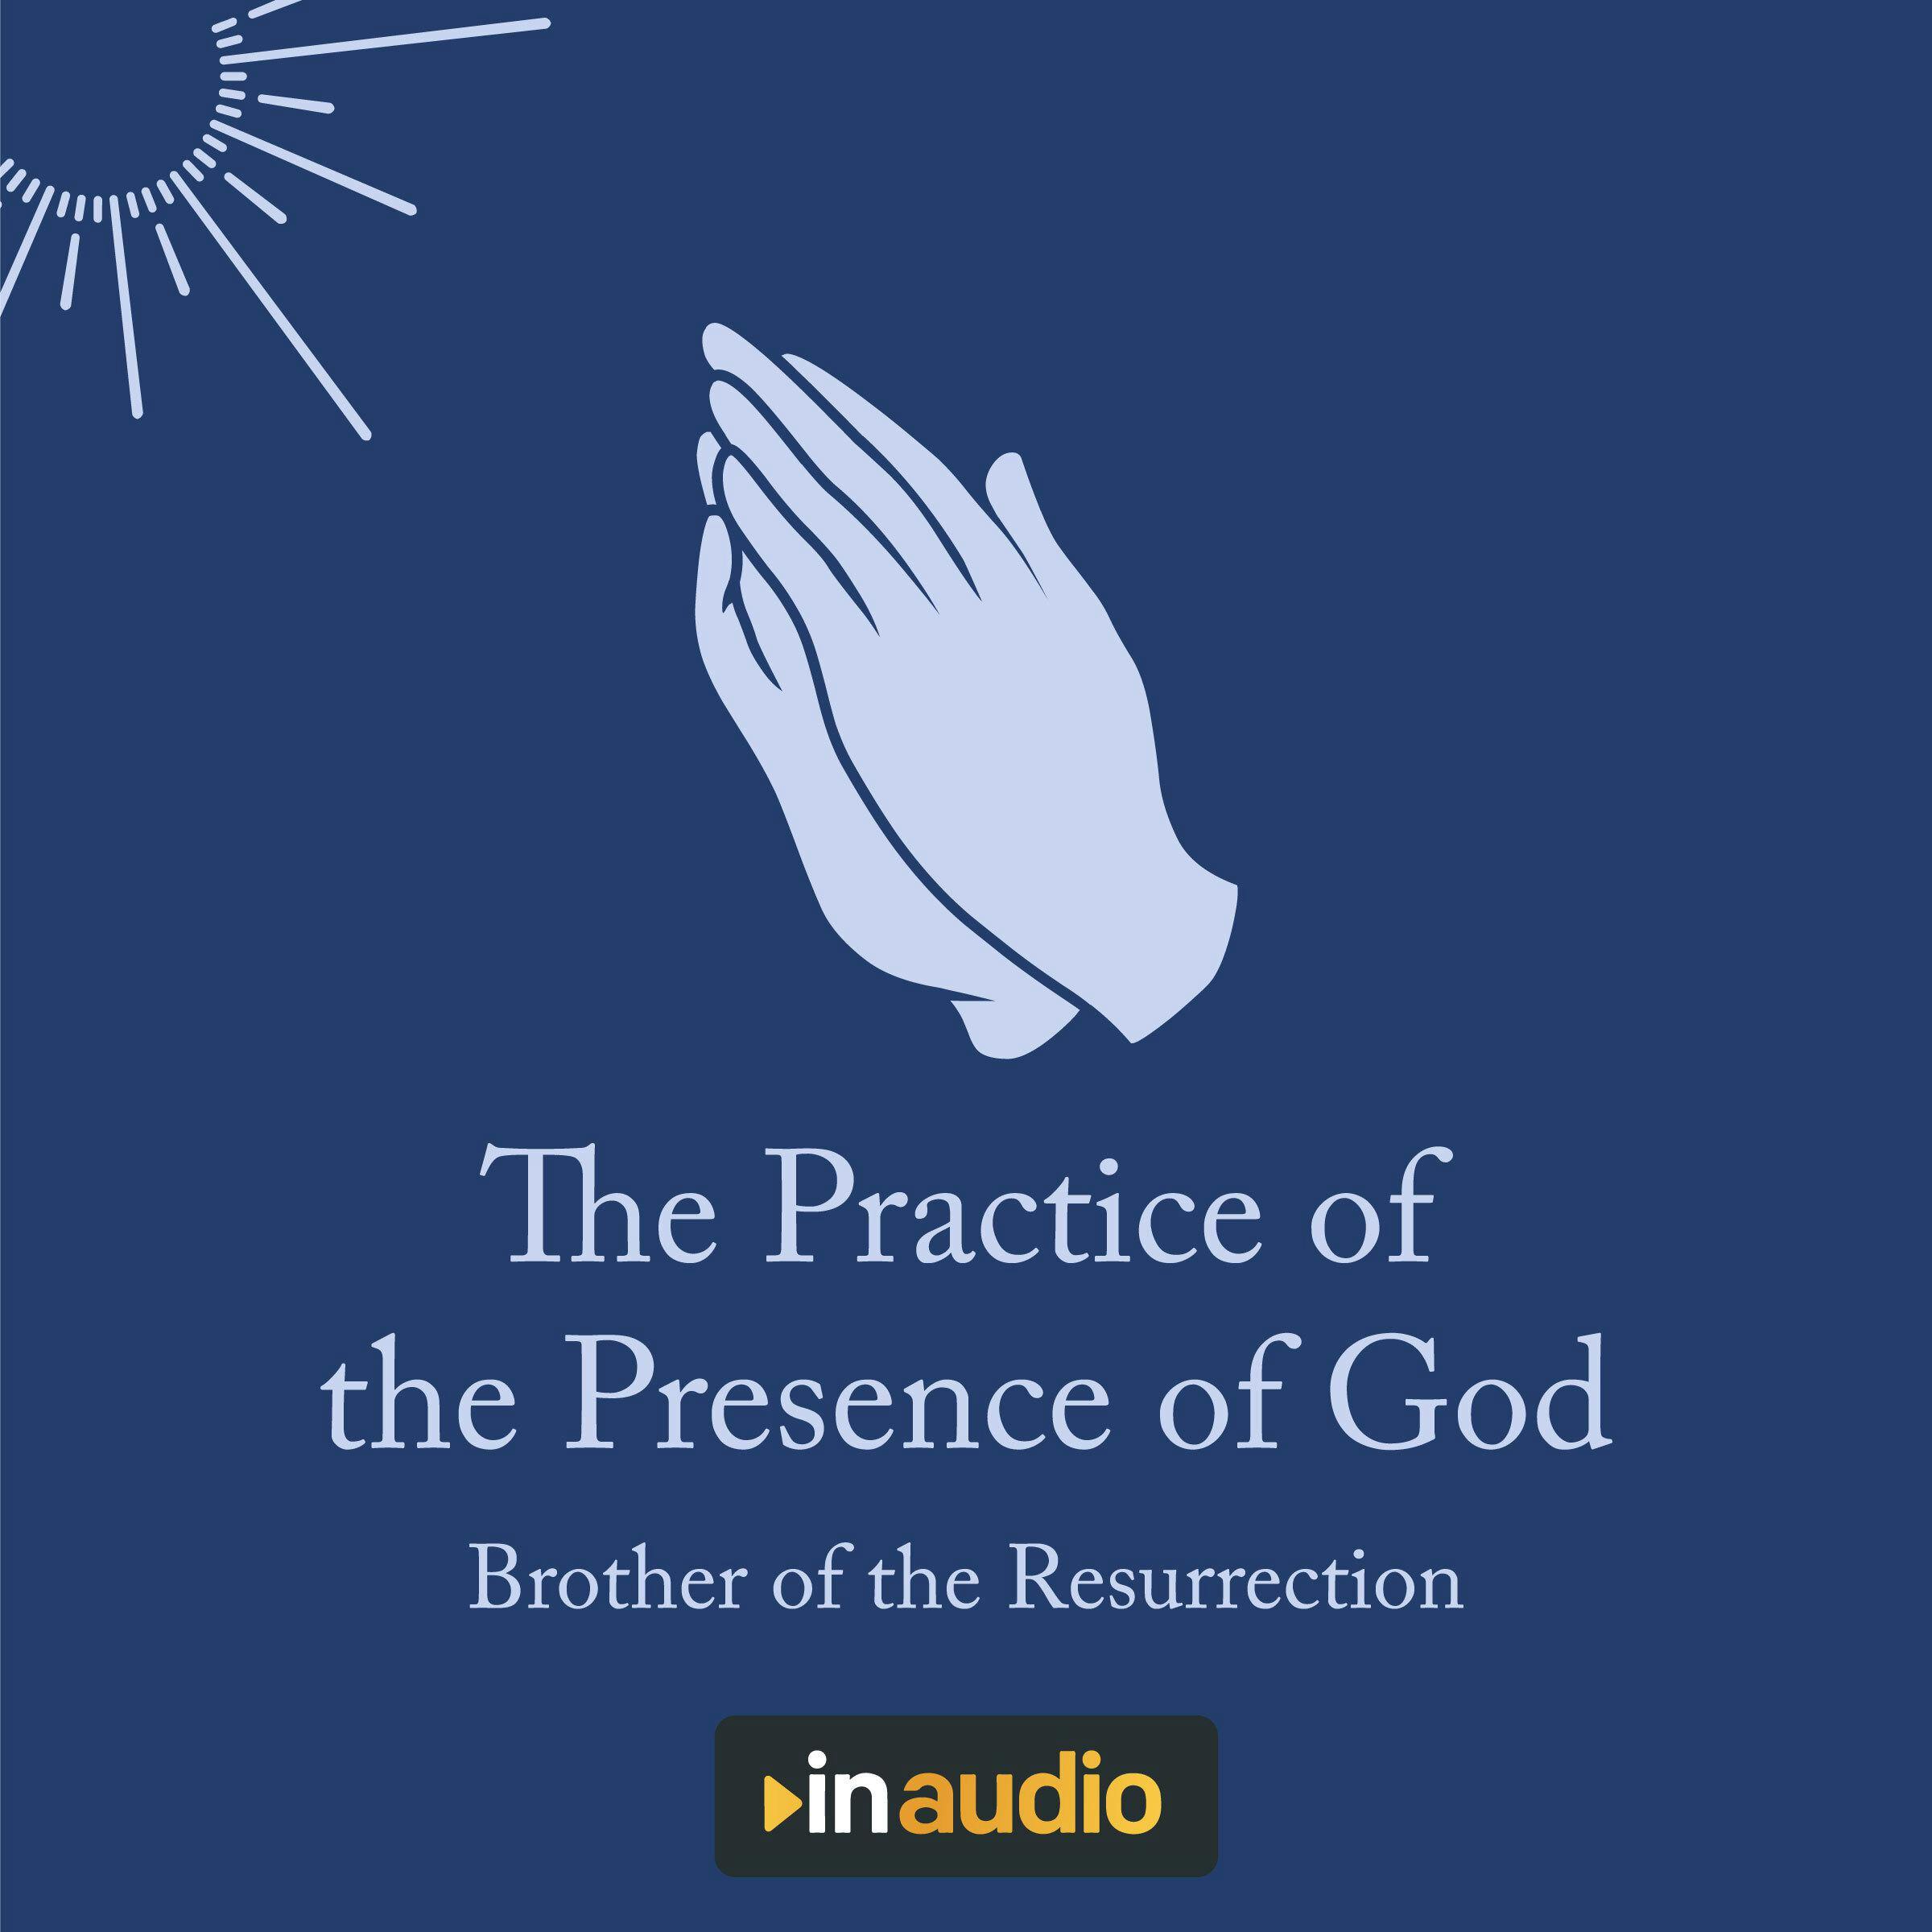 The Practice of the Presence of God - Brother of the Resurrection